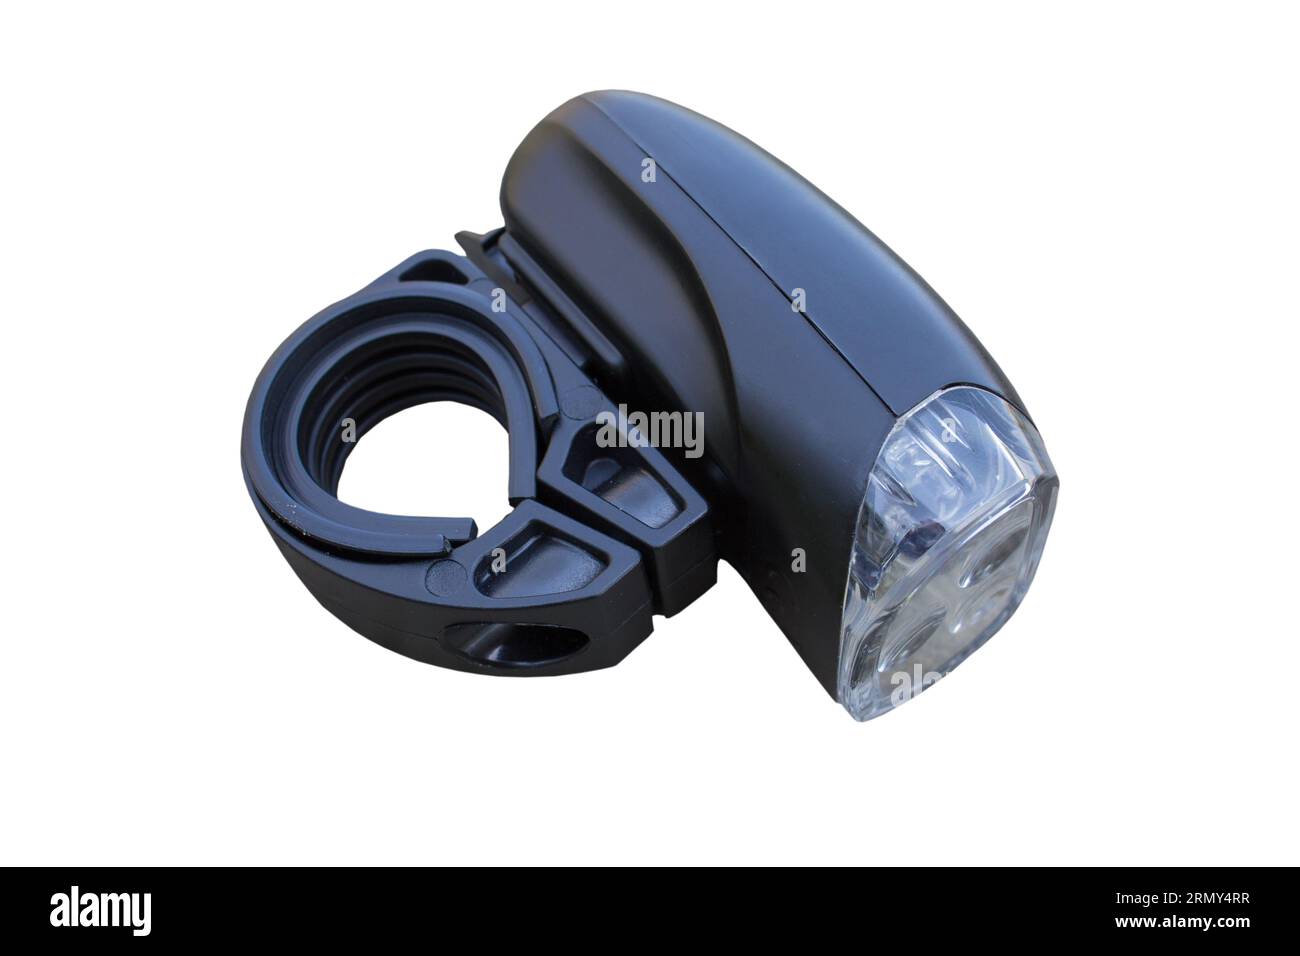 Front LED lights for bikes are isolated on a white background Stock Photo